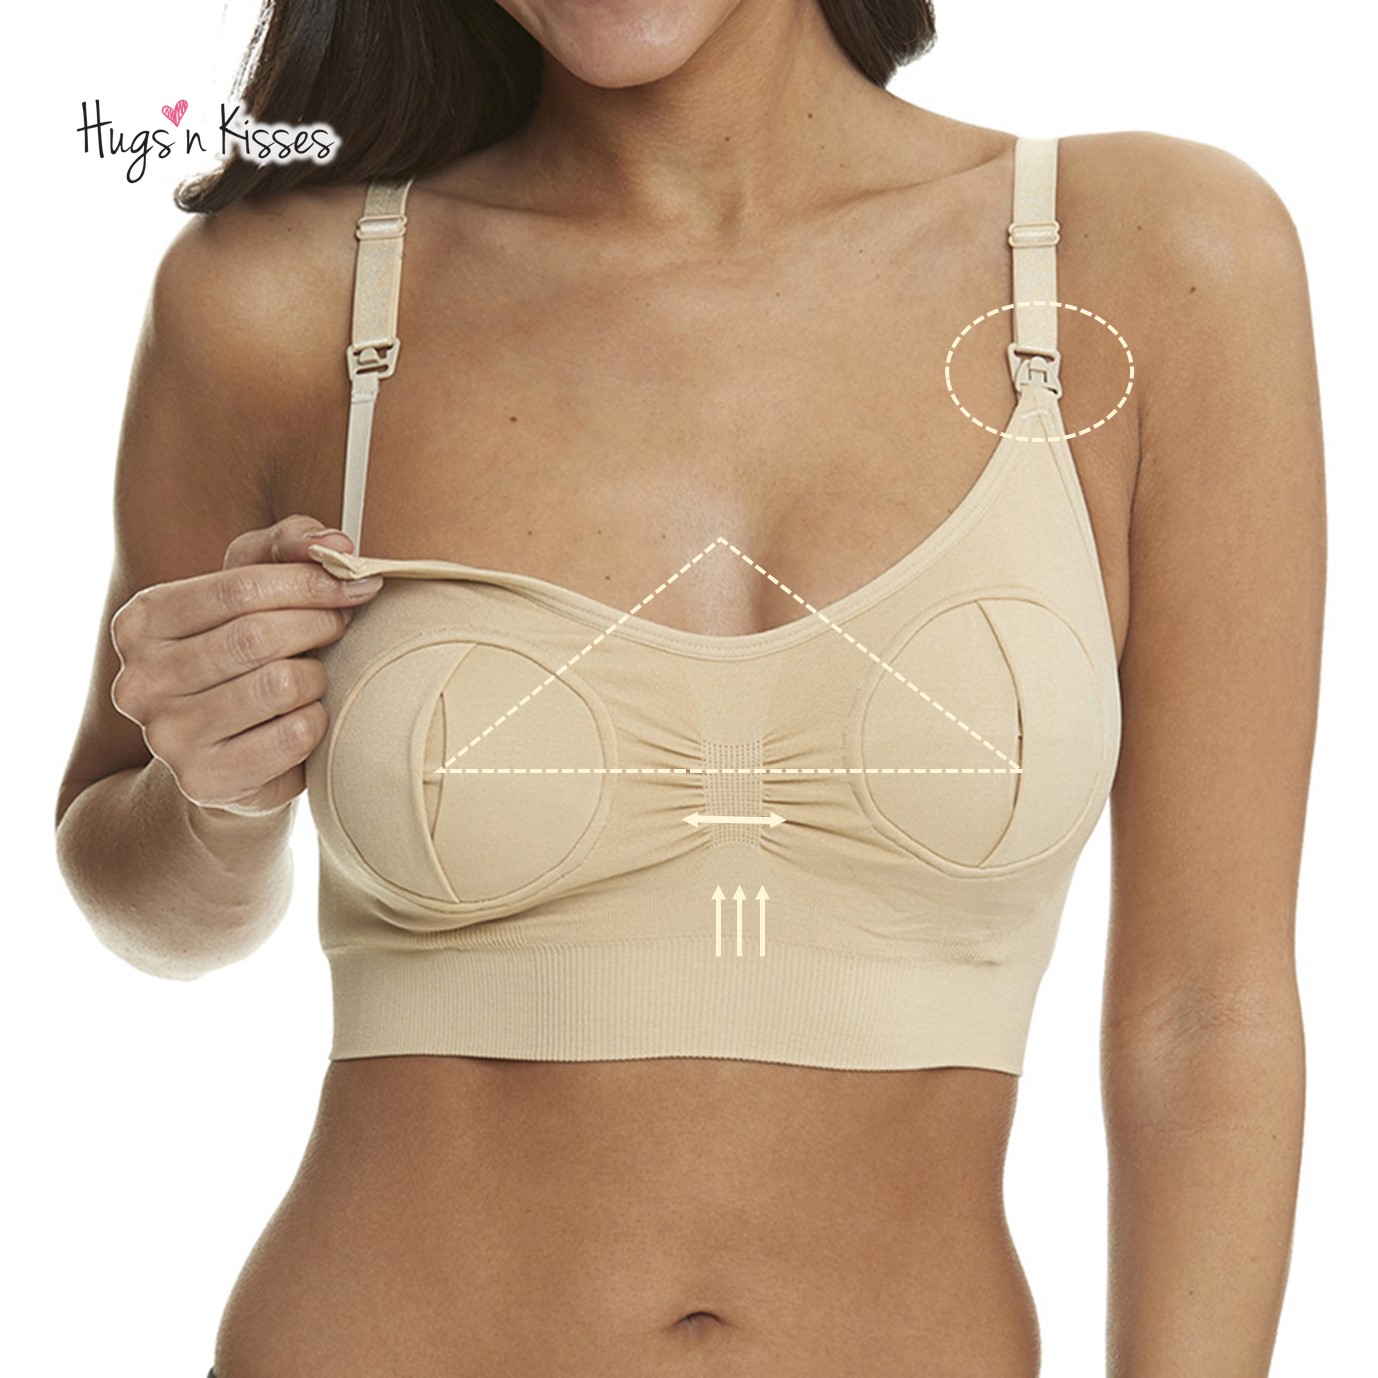 Simple Wishes Pumping Bra Hands Free & Nursing Bra, Supermom, Supports  Spectra, Medela, Elvie, Willow and more…, Medium, Sunkissed Rose, No  Padding in Bahrain